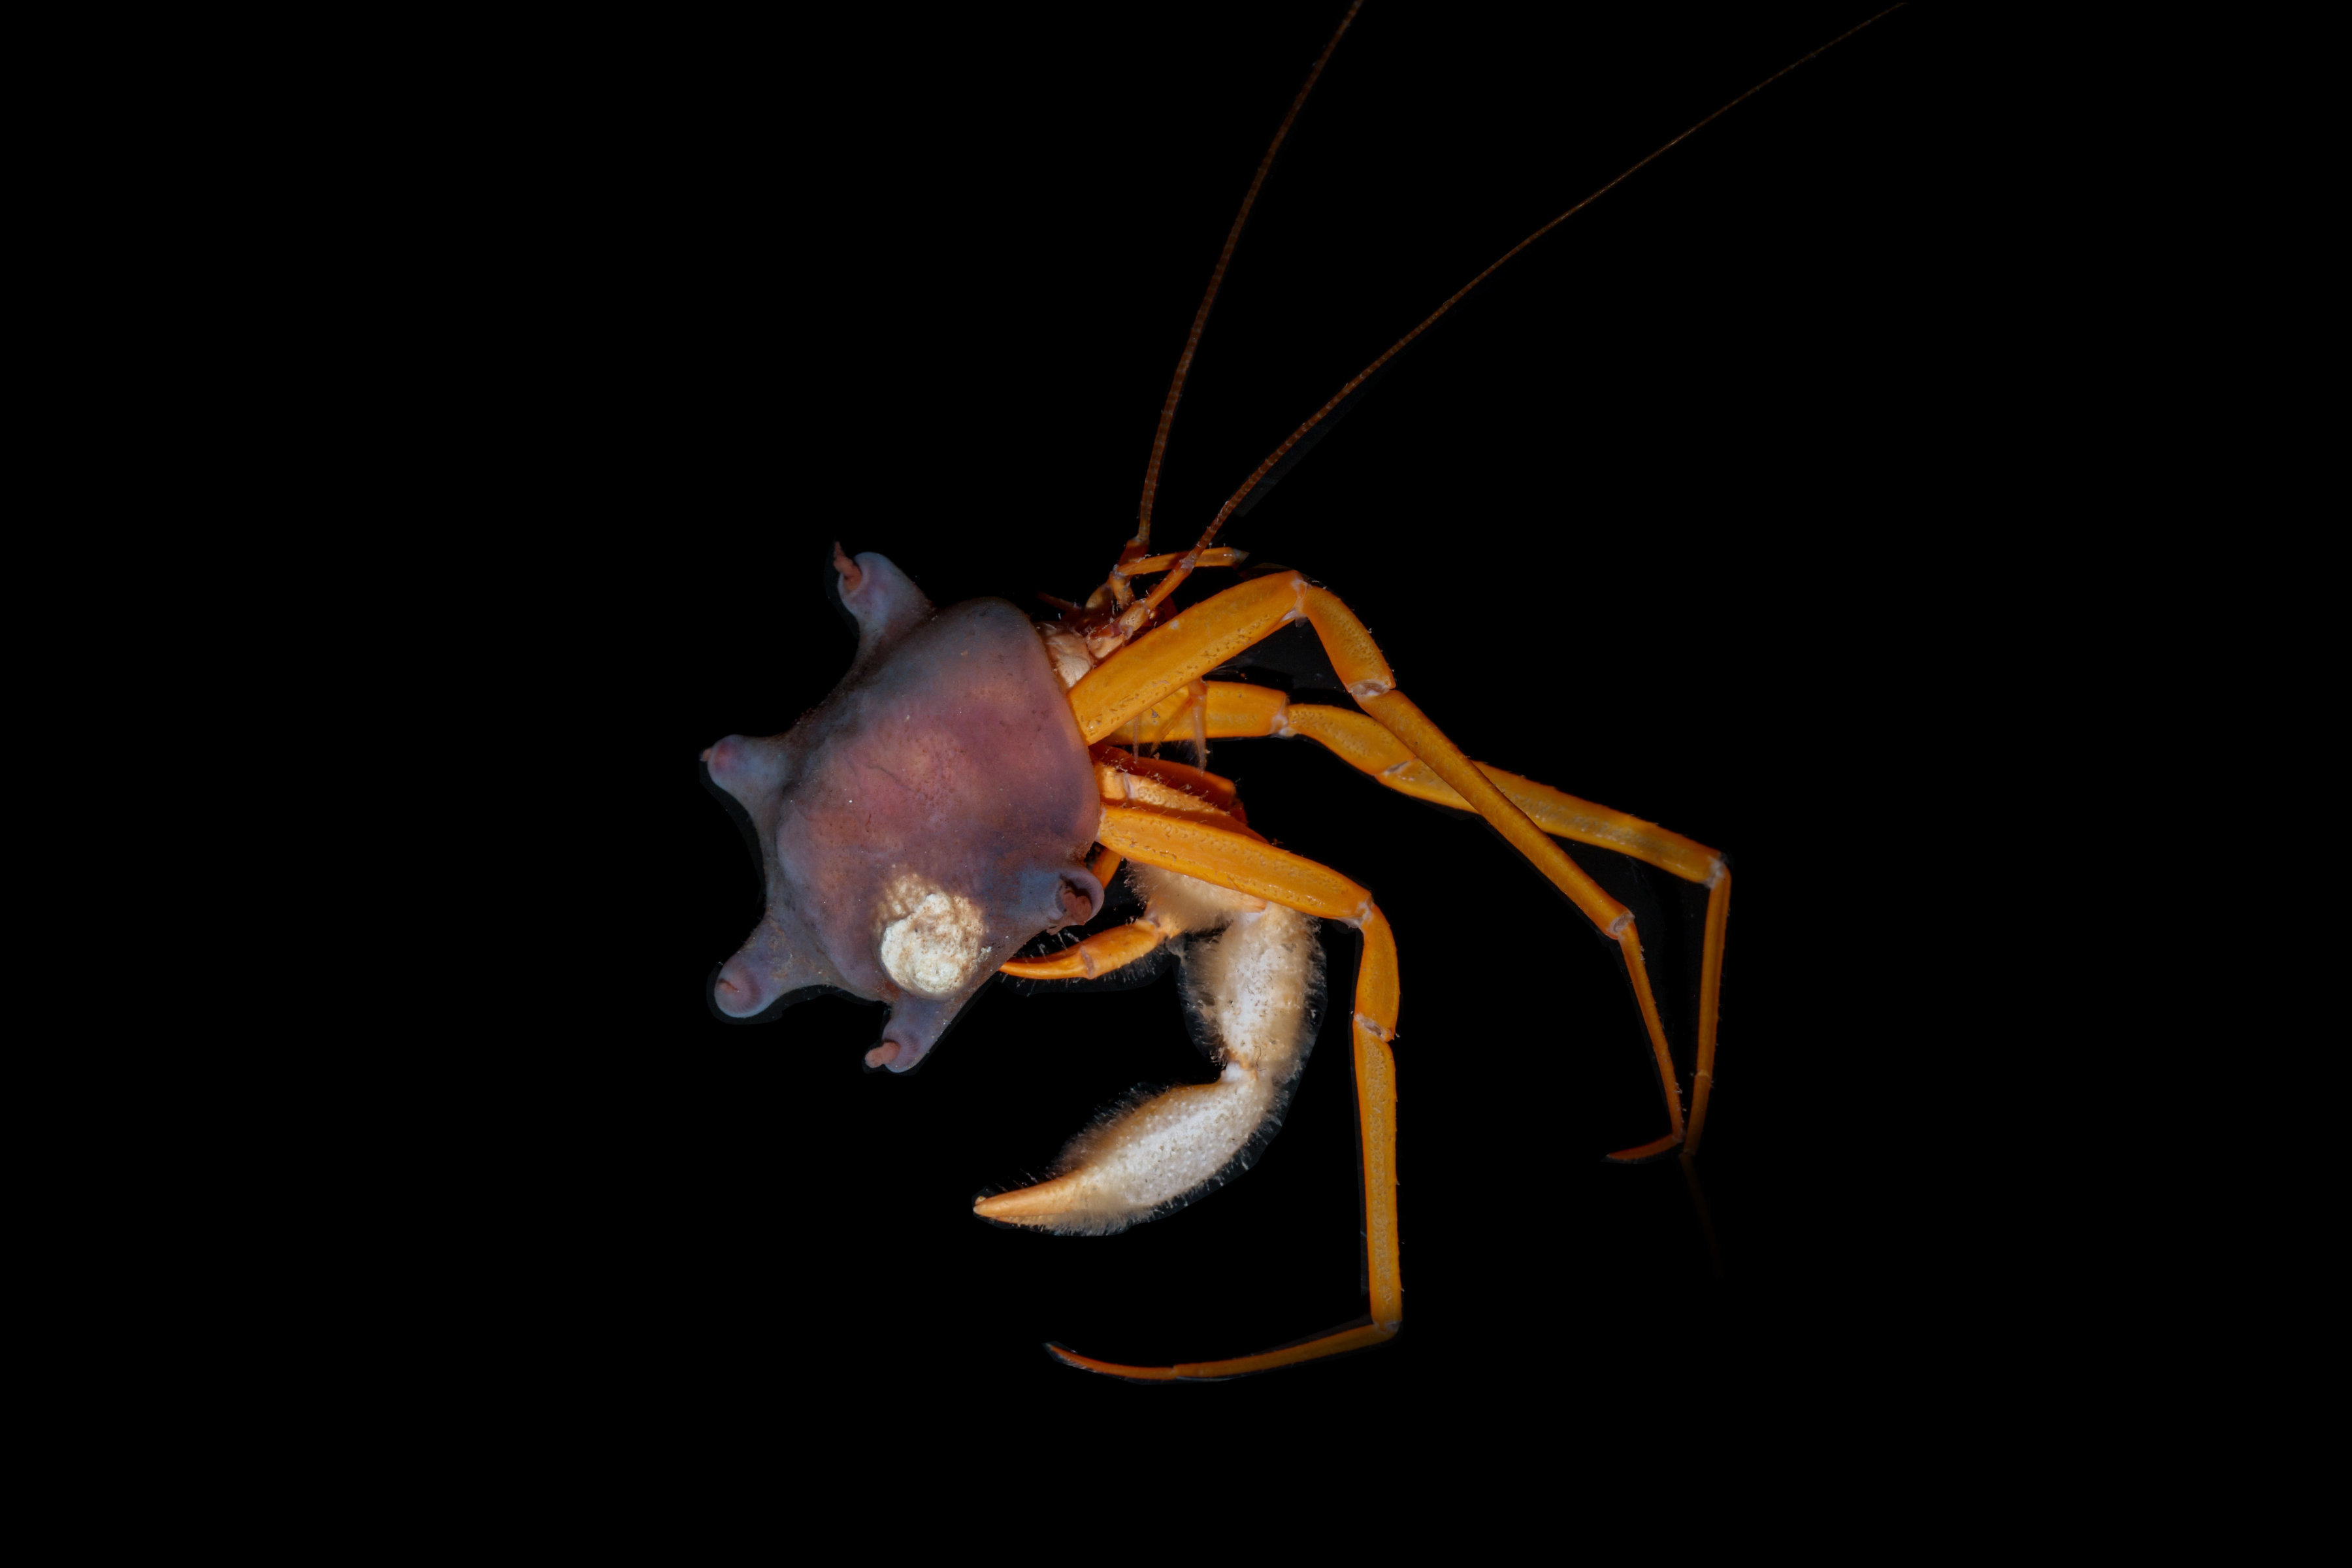 A hermit crab caught at 2500 m depths off NSW